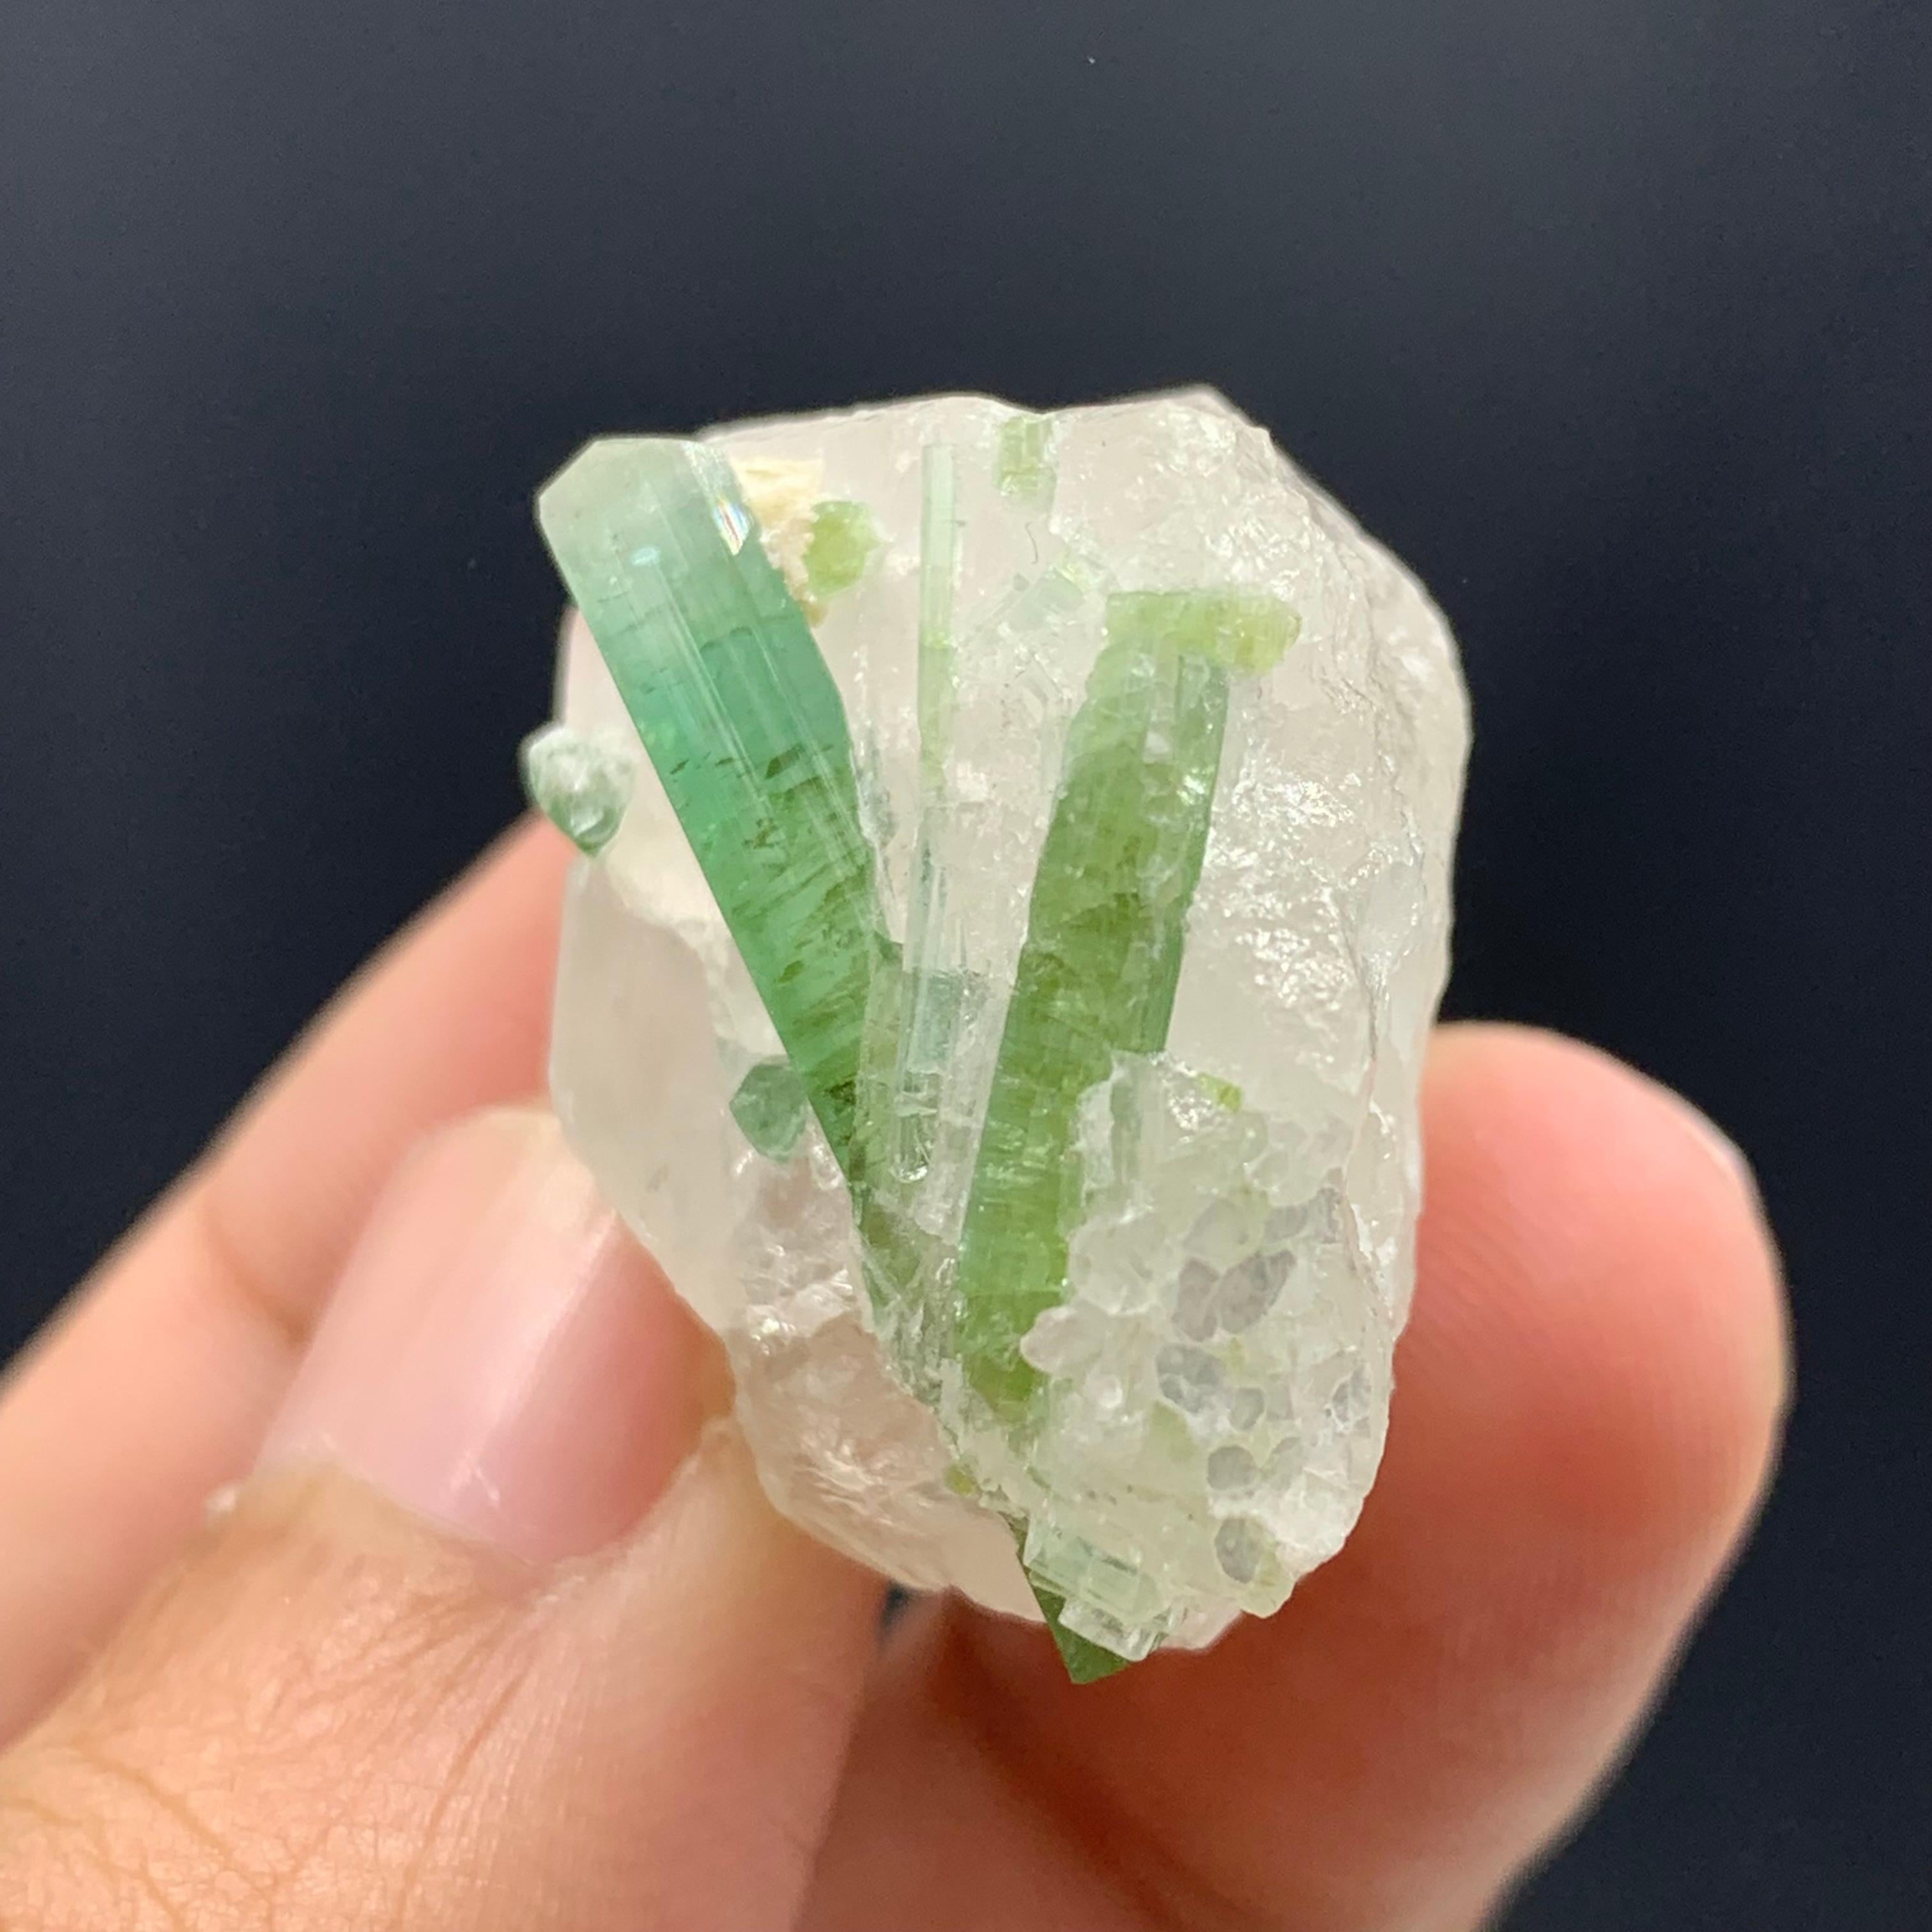 Rock Crystal 18.49 Gram Beautiful Tourmaline Crystals Attached With Quartz From Afghanistan  For Sale